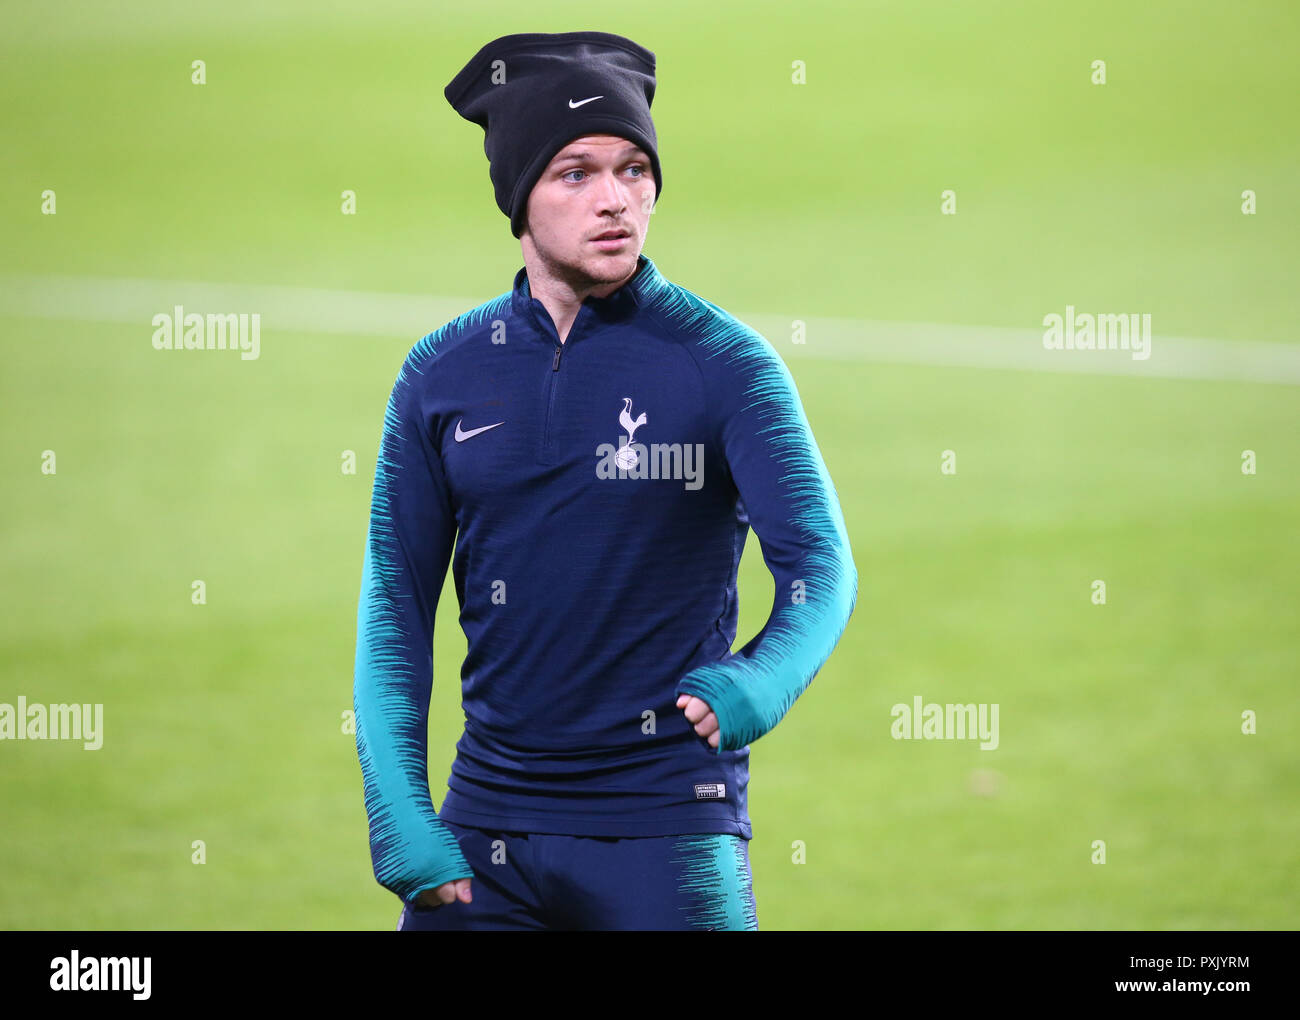 Eindhoven, Netherlands. October 23. 2018 Tottenham Hotspur's Kieran Trippier during Tottenham Hotspur training session ahead of the UEFA Champions League Group B match against PSV Eindhoven at Phillips stadium, in Eindhoven, Netherlands, on 23 Oct , 2018  Credit Action Foto Sport Credit: Action Foto Sport/Alamy Live News Stock Photo